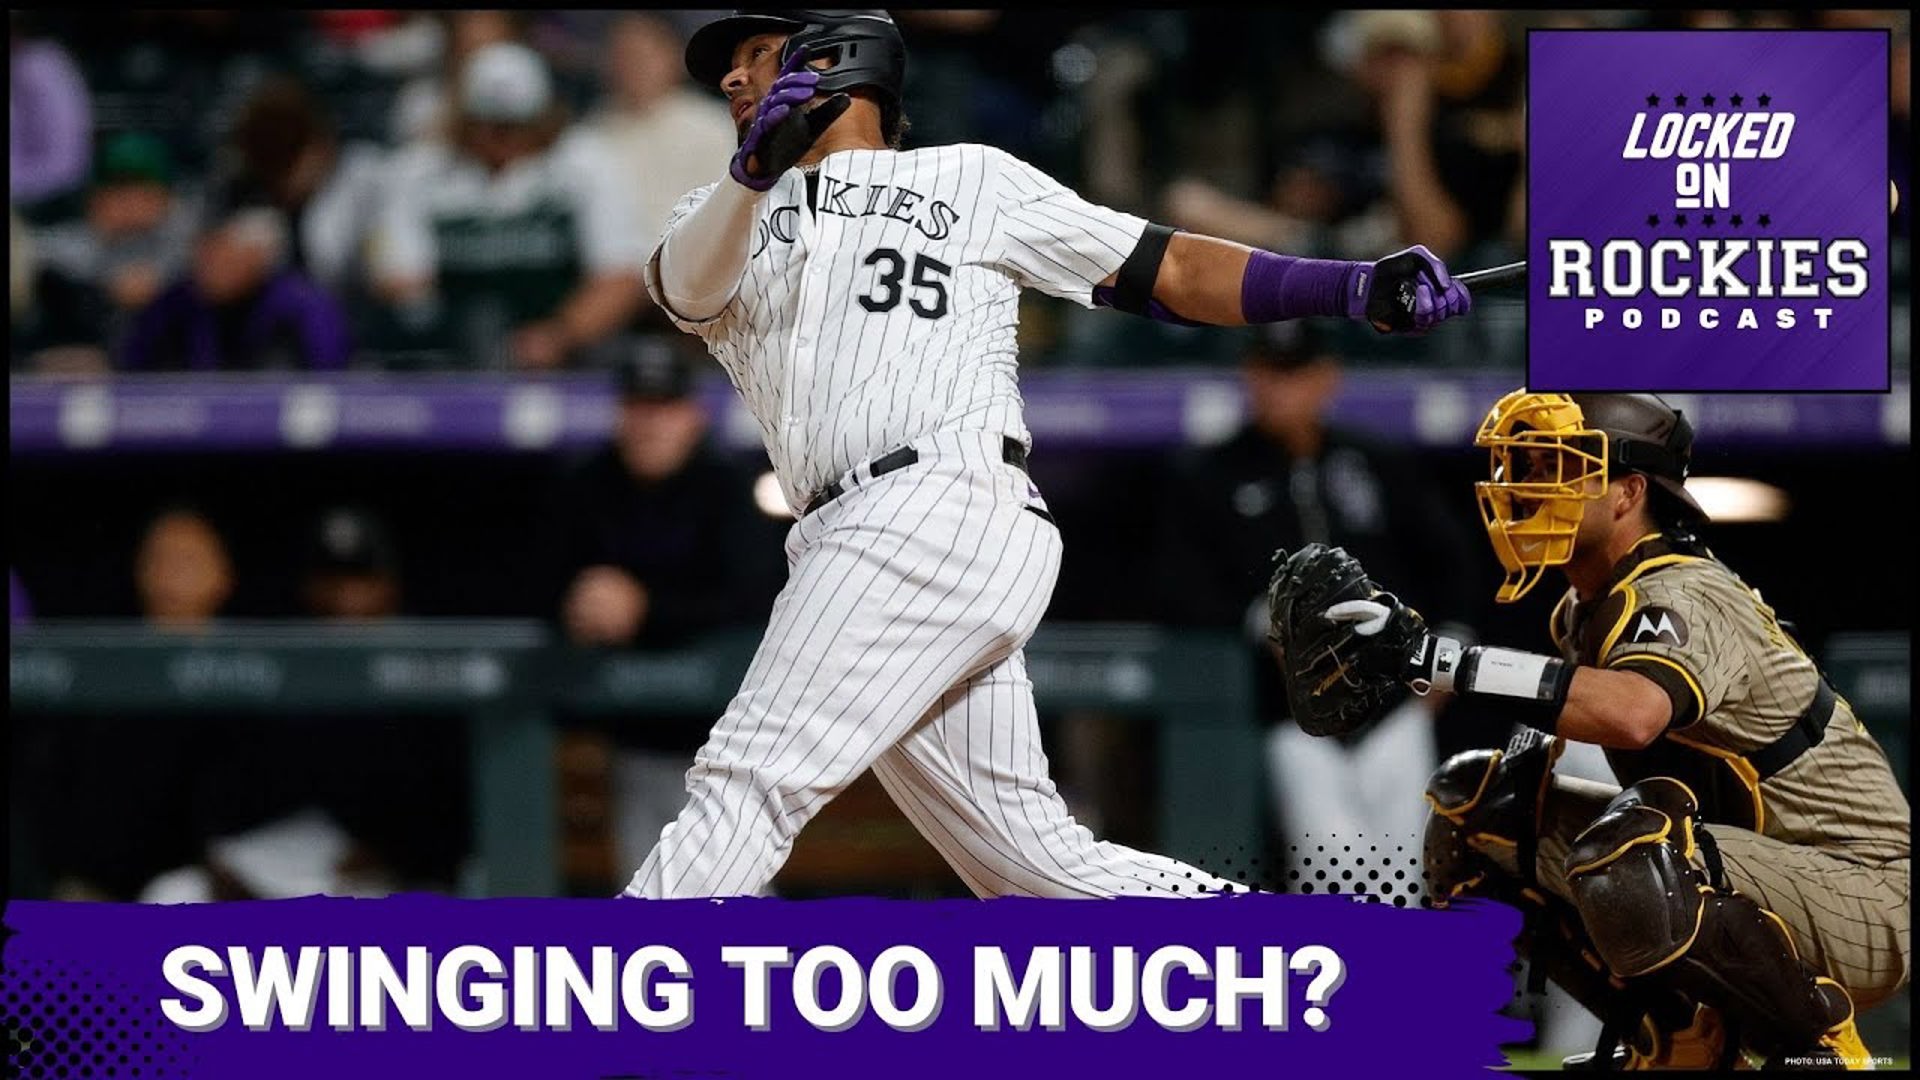 The Colorado Rockies fall behind early yet again and are unable to make the comeback in game three against the Padres.